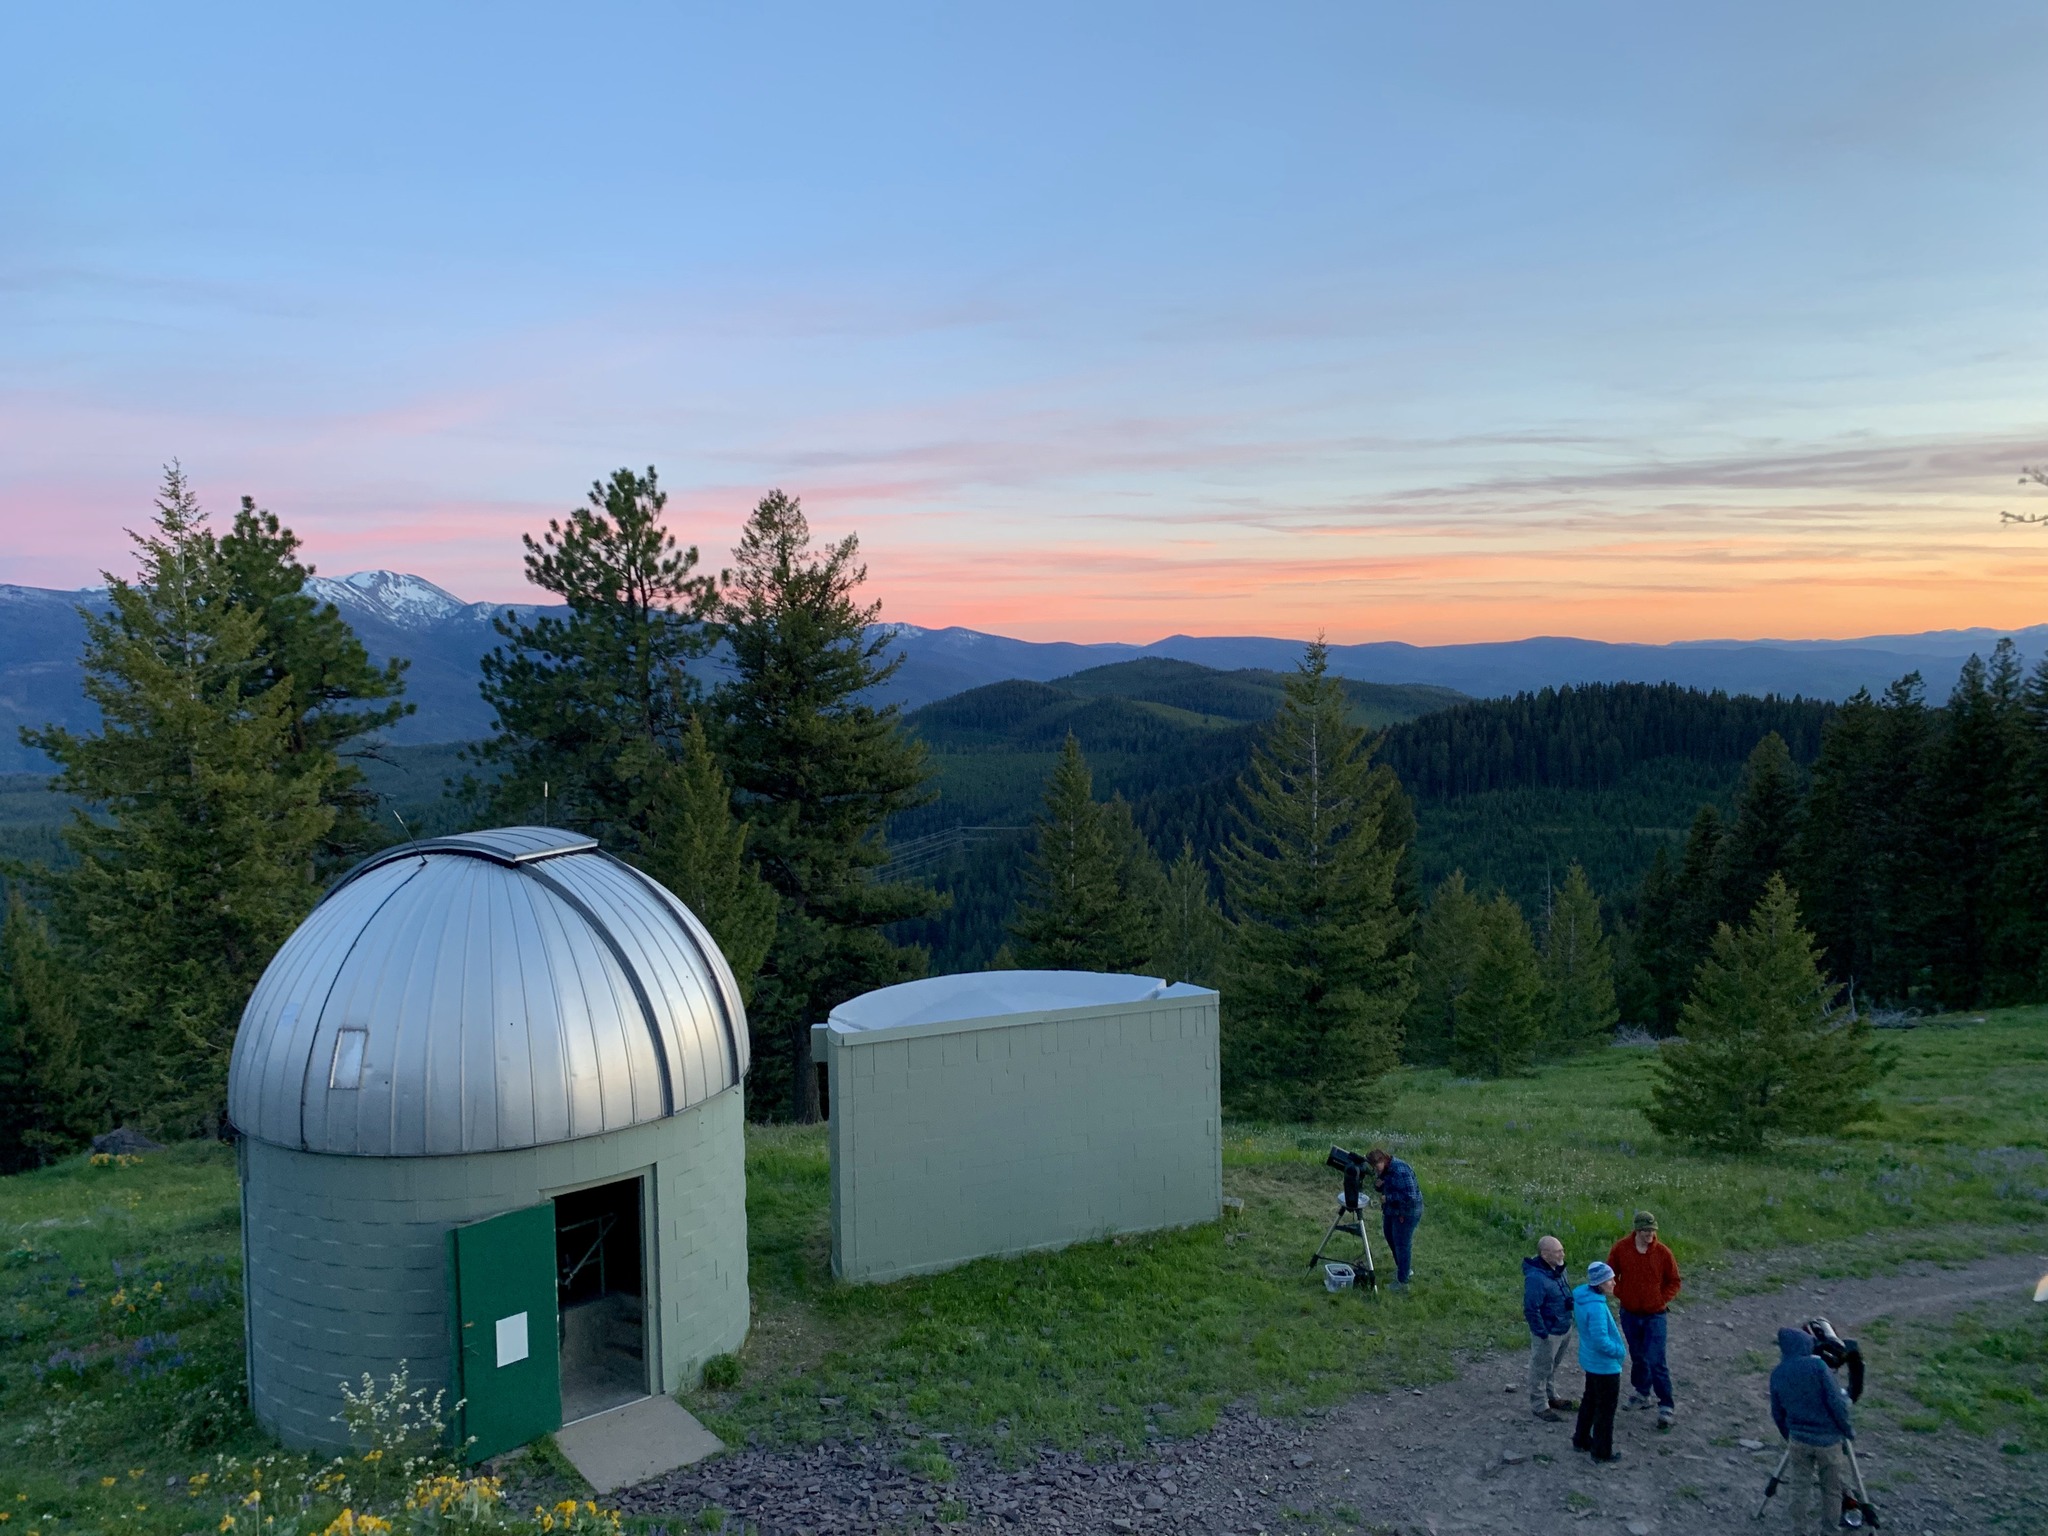 observatory dome at sunset with several people around